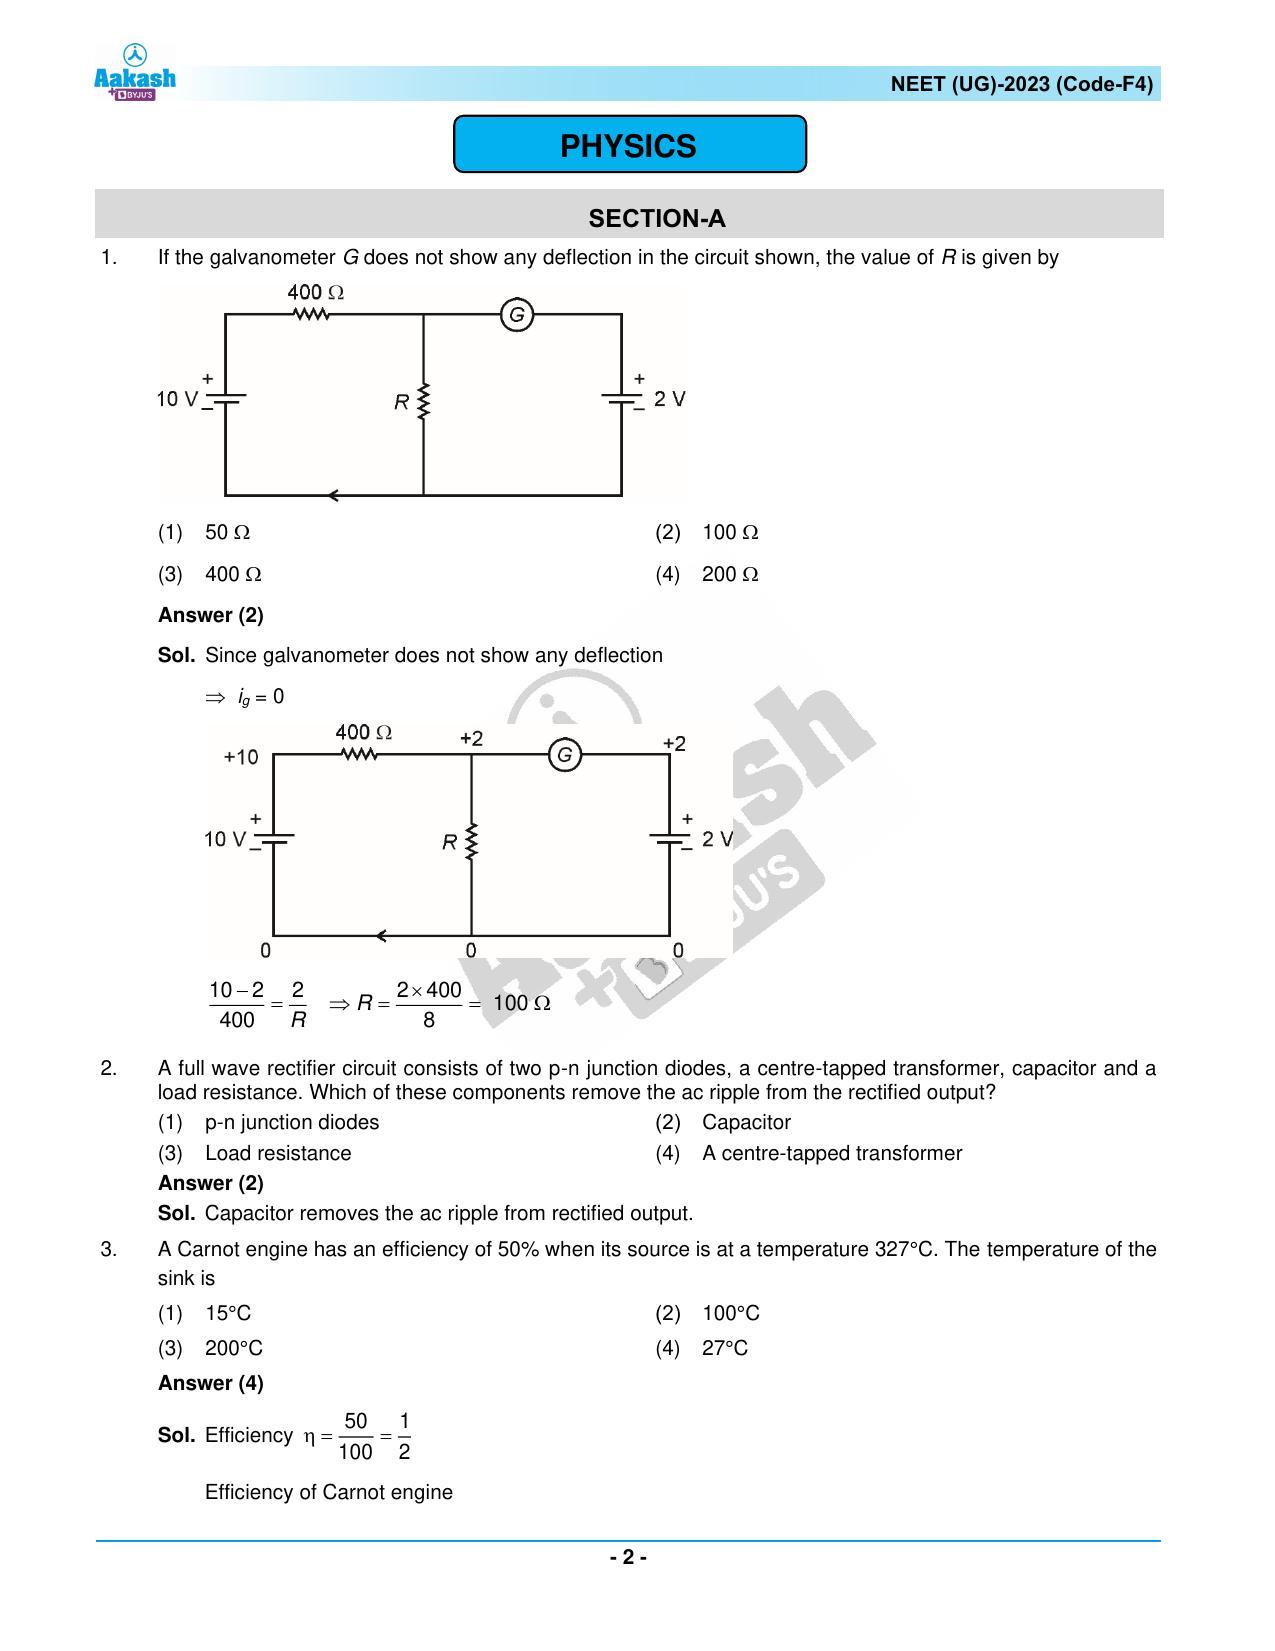 NEET 2023 Question Paper F4 - Page 2